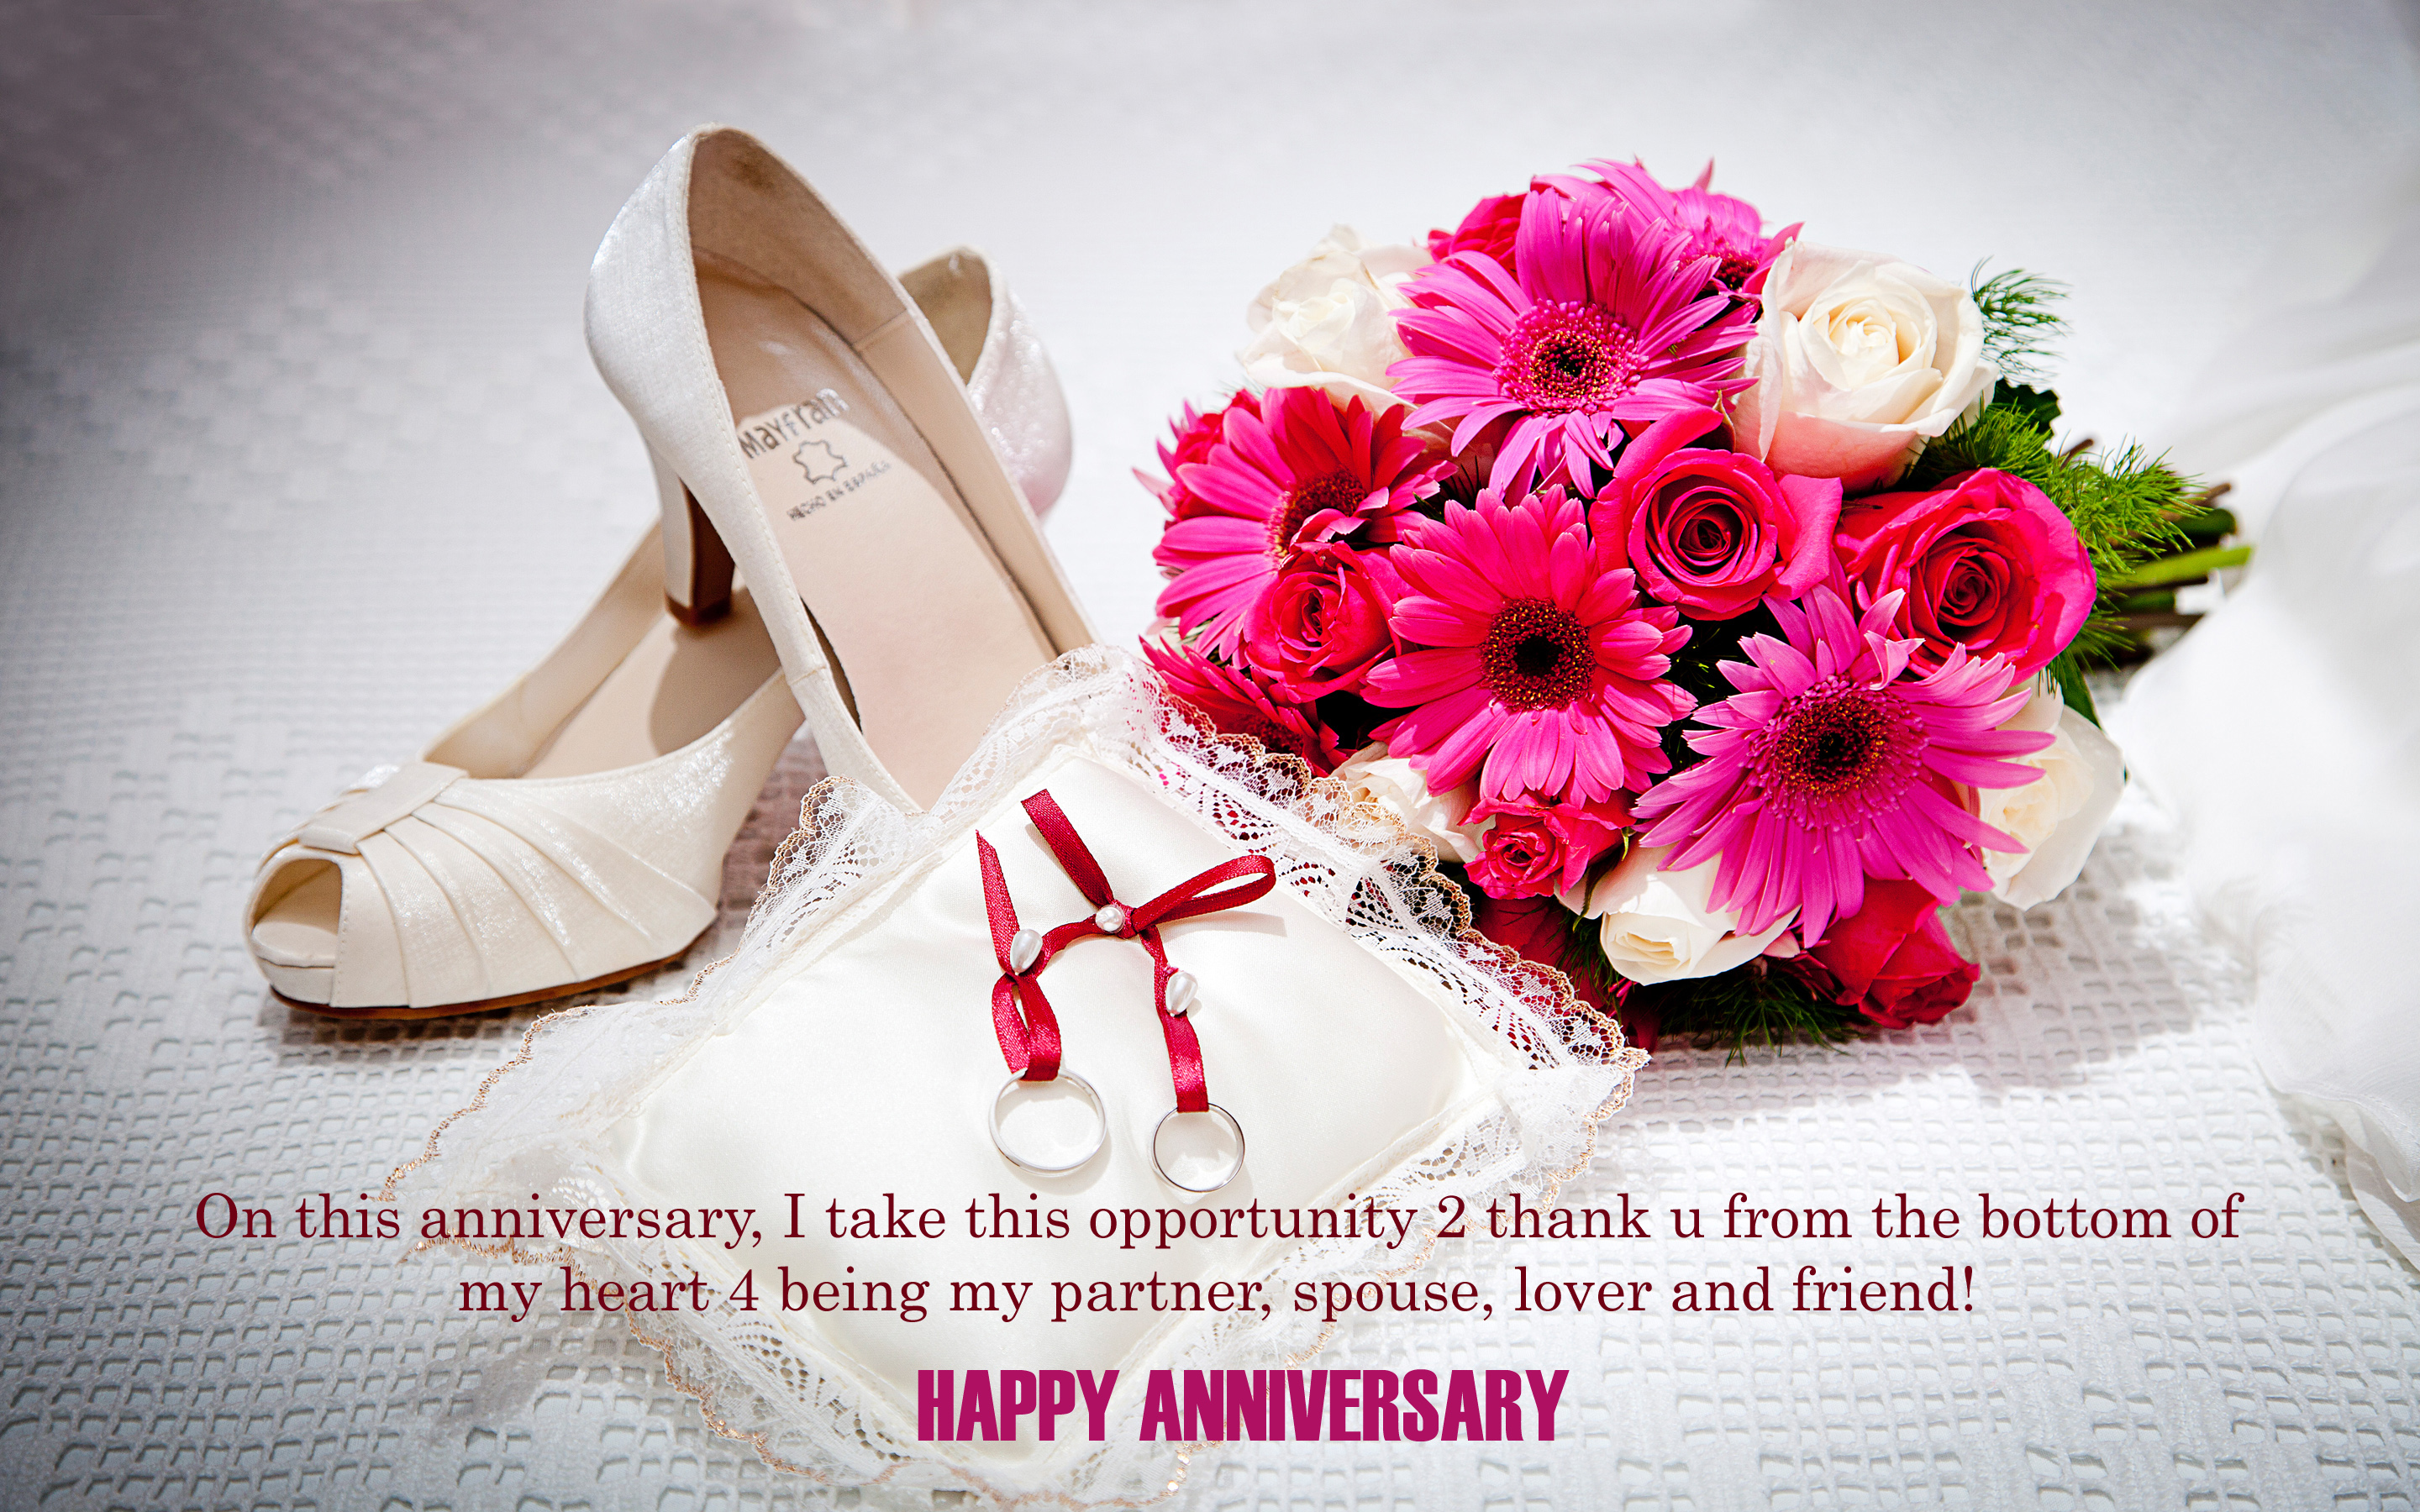 Free Download Happy Marriage Anniversary 1080p Hd Wallpapers Hd Wallpapers x1800 For Your Desktop Mobile Tablet Explore 75 Happy Anniversary Background Happy Anniversary Wallpaper Christian Happy Anniversary Wallpaper Images